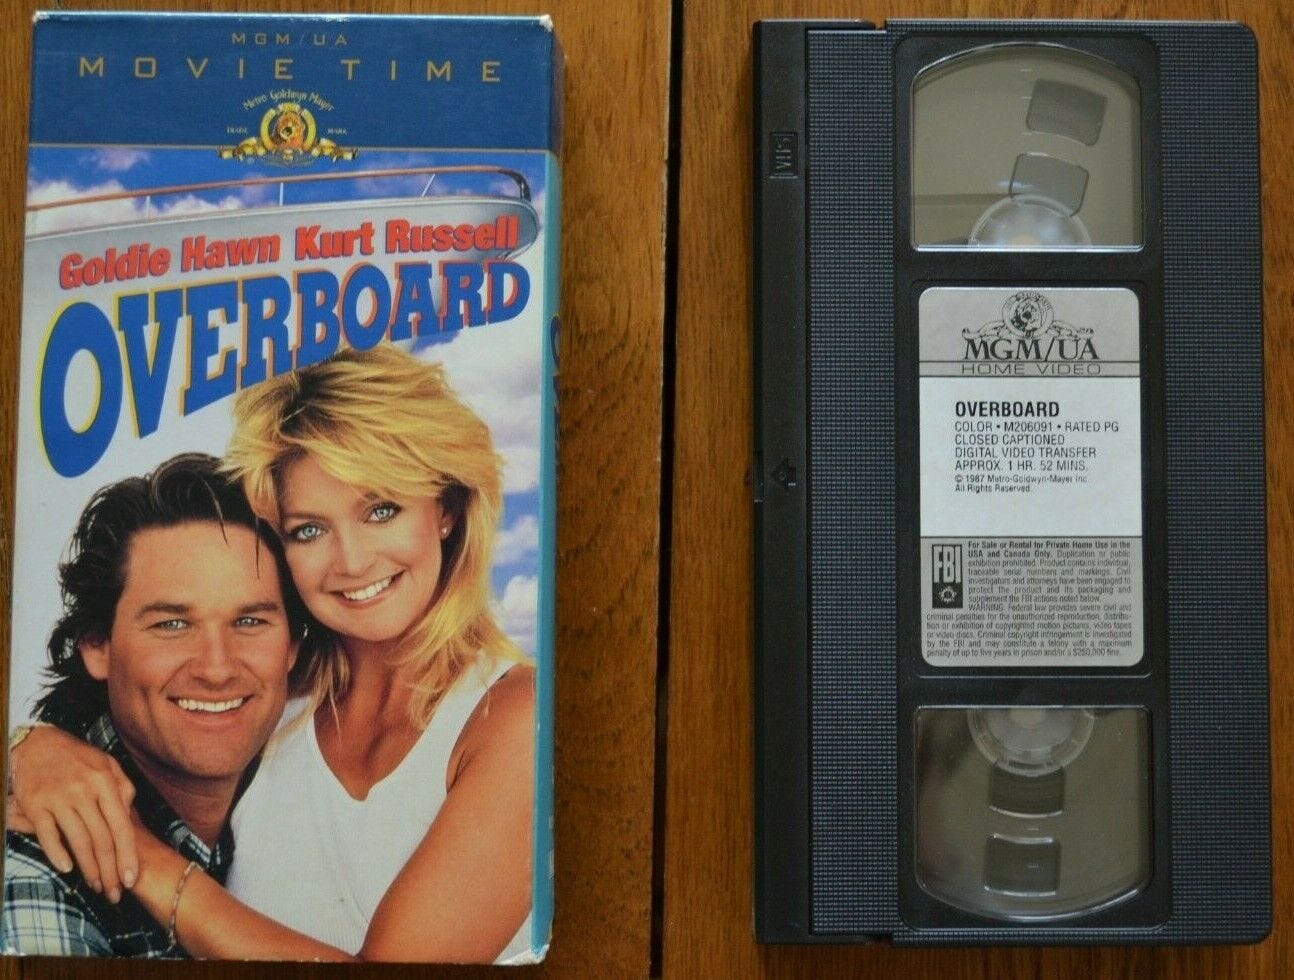 Overboard (VHS, 1996, Movie Time) Kurt Russell, Goldie Hawn, Fast Ship  27616609137 | eBay